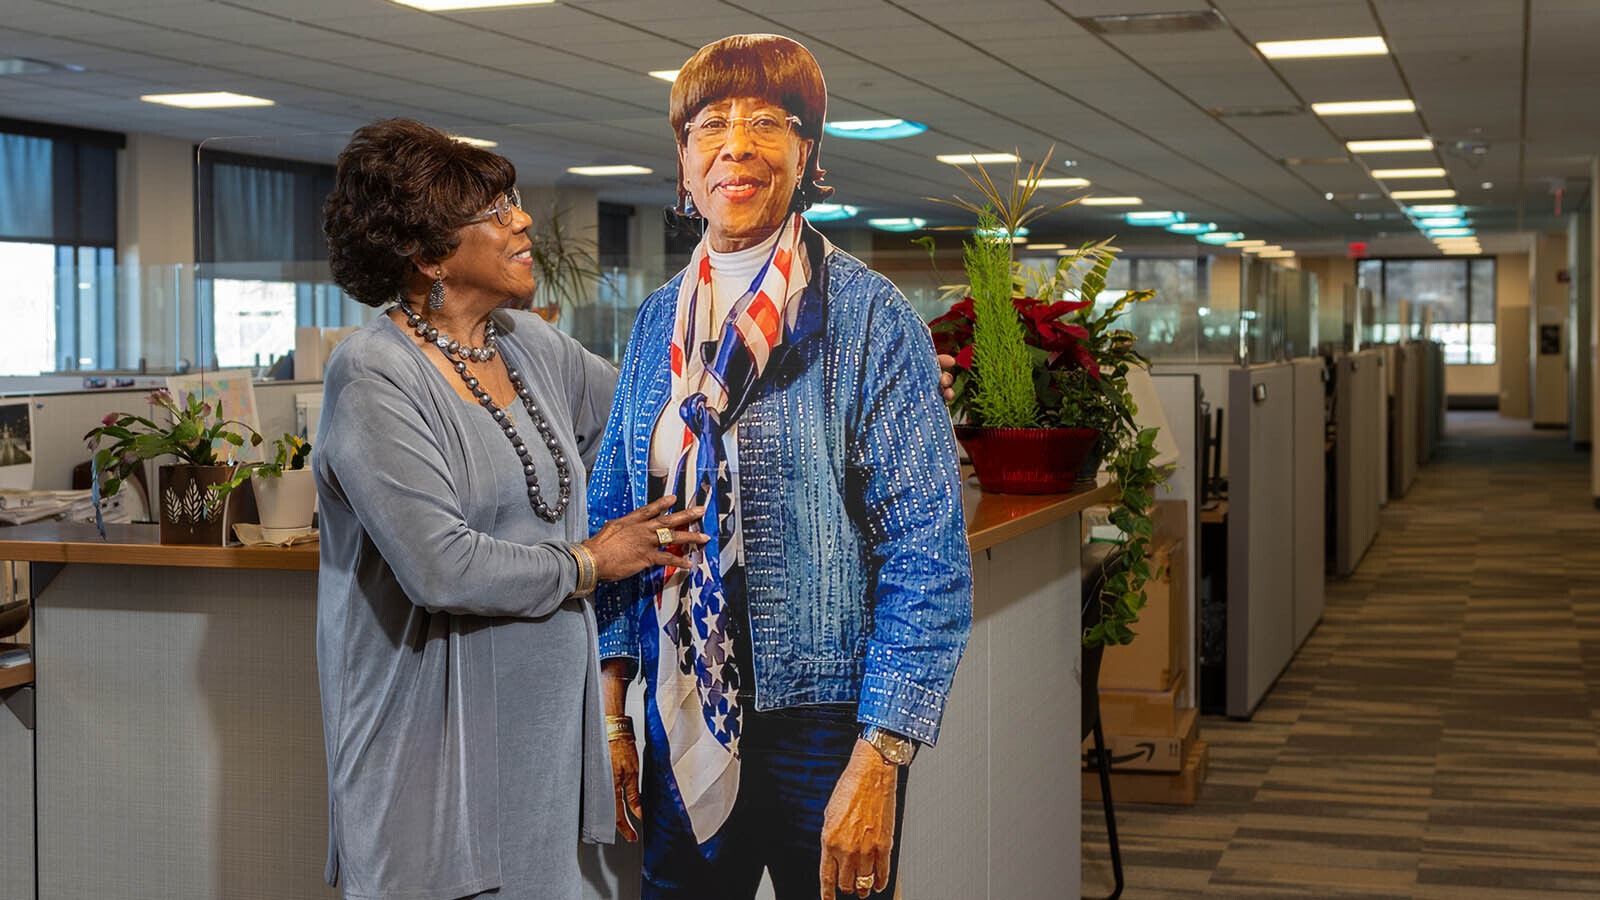 Rita Watson has worked for the state of Wyoming for 54 years. One time when she left for vacation, her coworkers had this life-sized cutout of her made and put it at her desk.